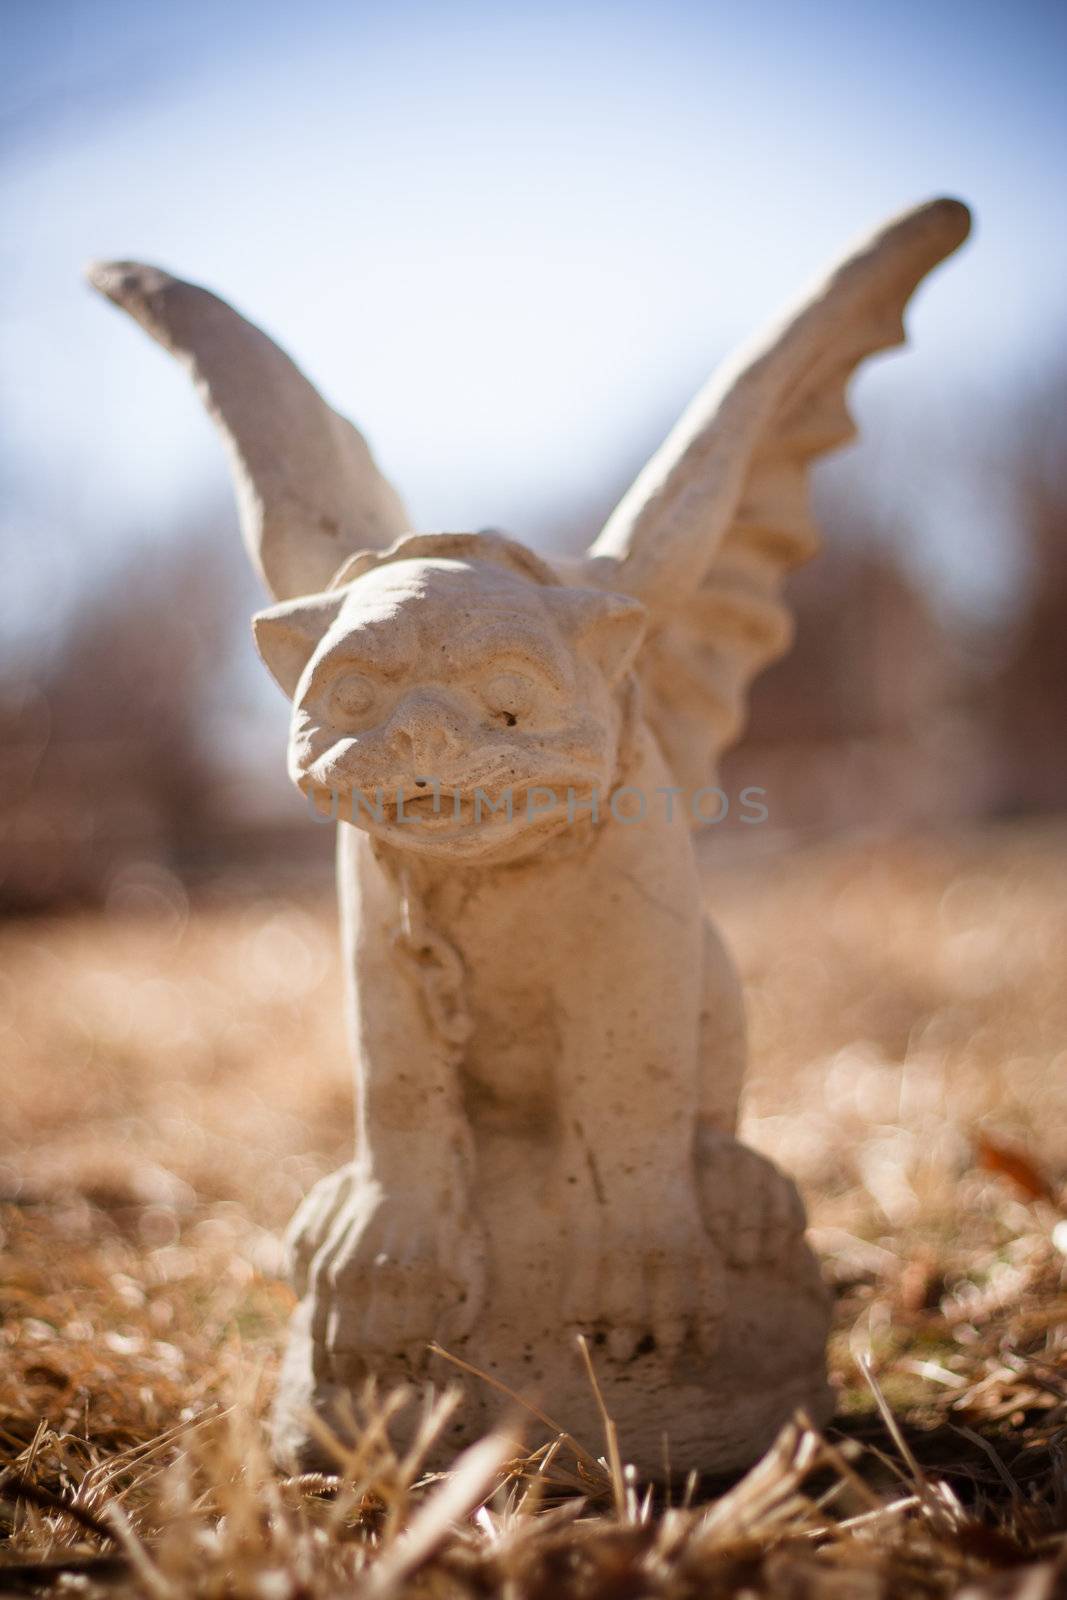 An old gargoyle statue sits in some dead grass.